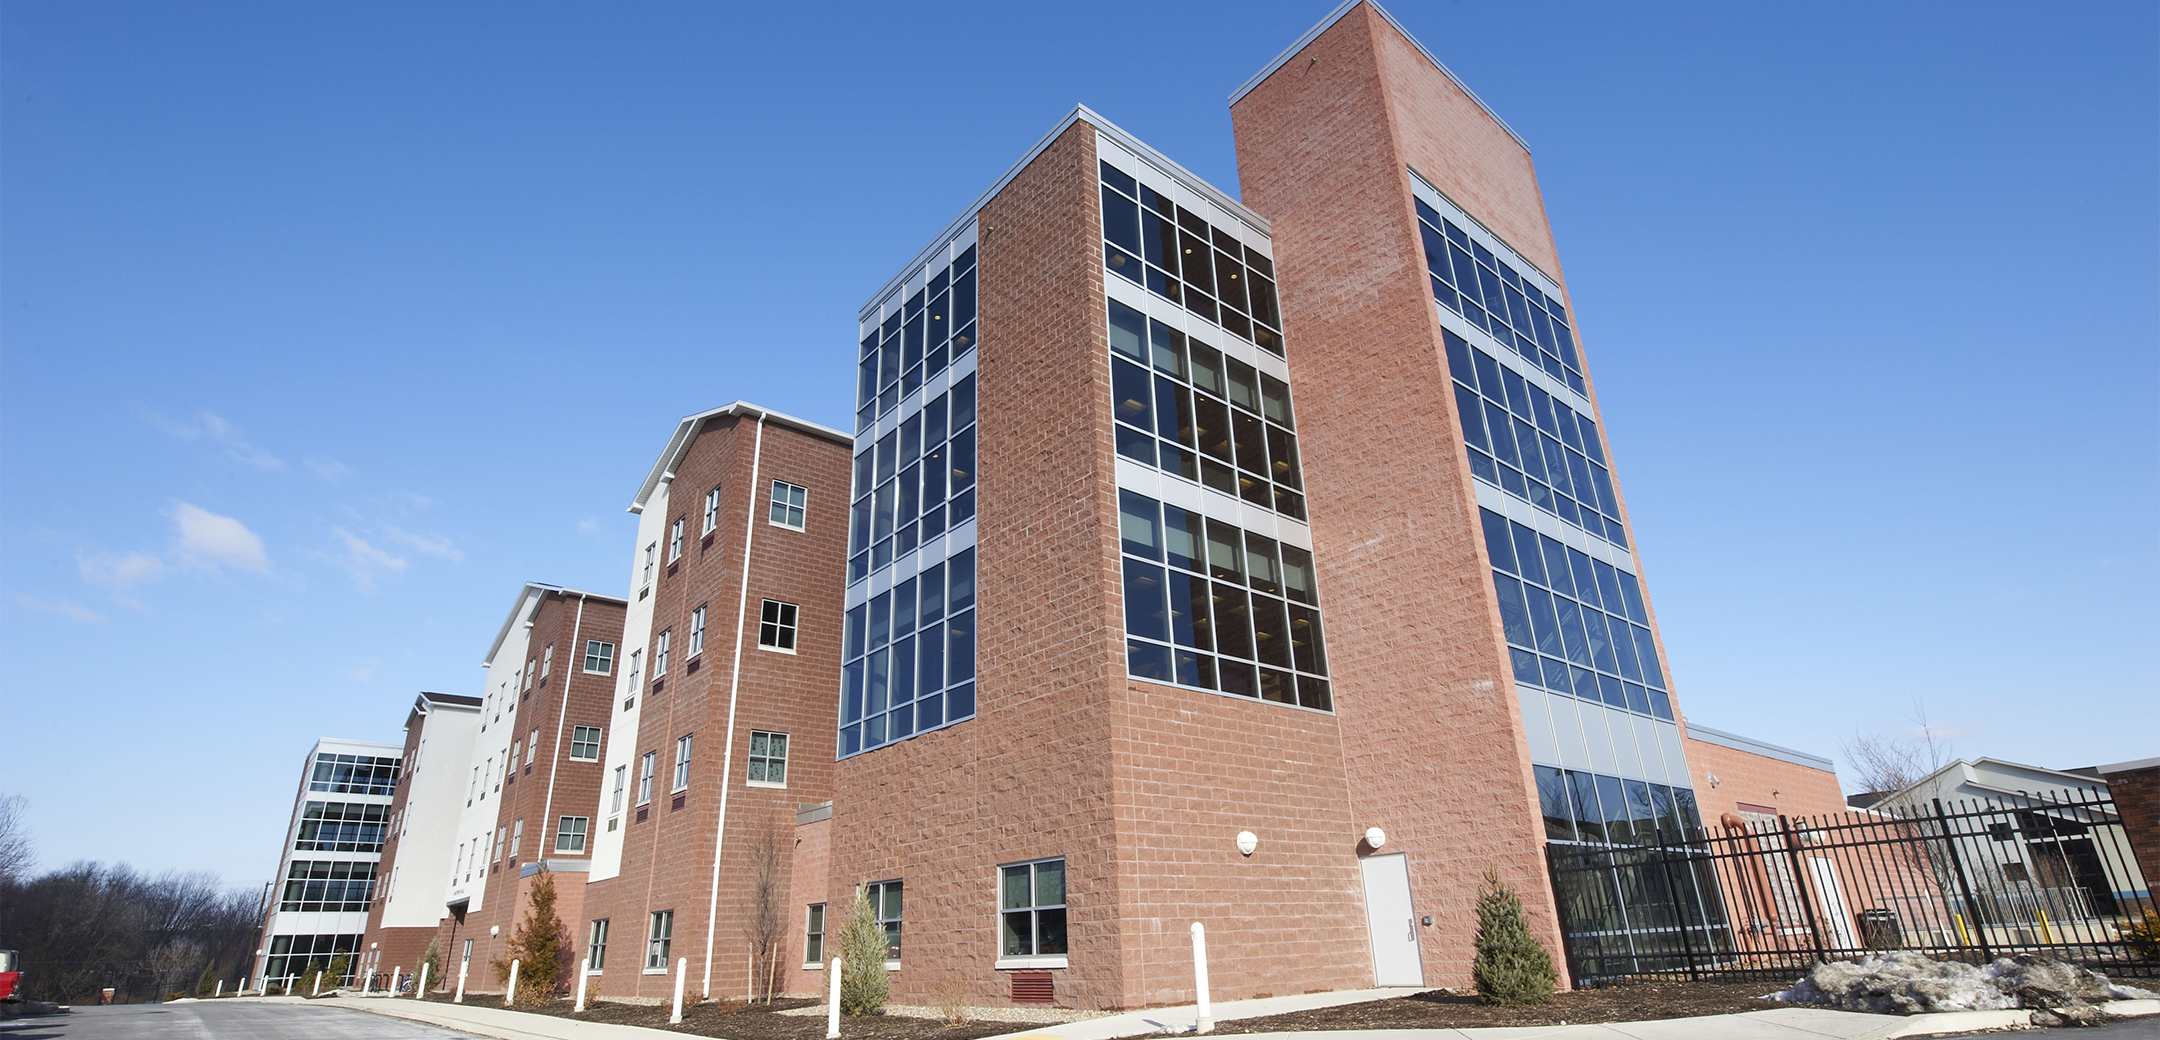 The exterior of the Stage x PA College brick building with three story height glass window accents, showcasing the front driveway and gate.